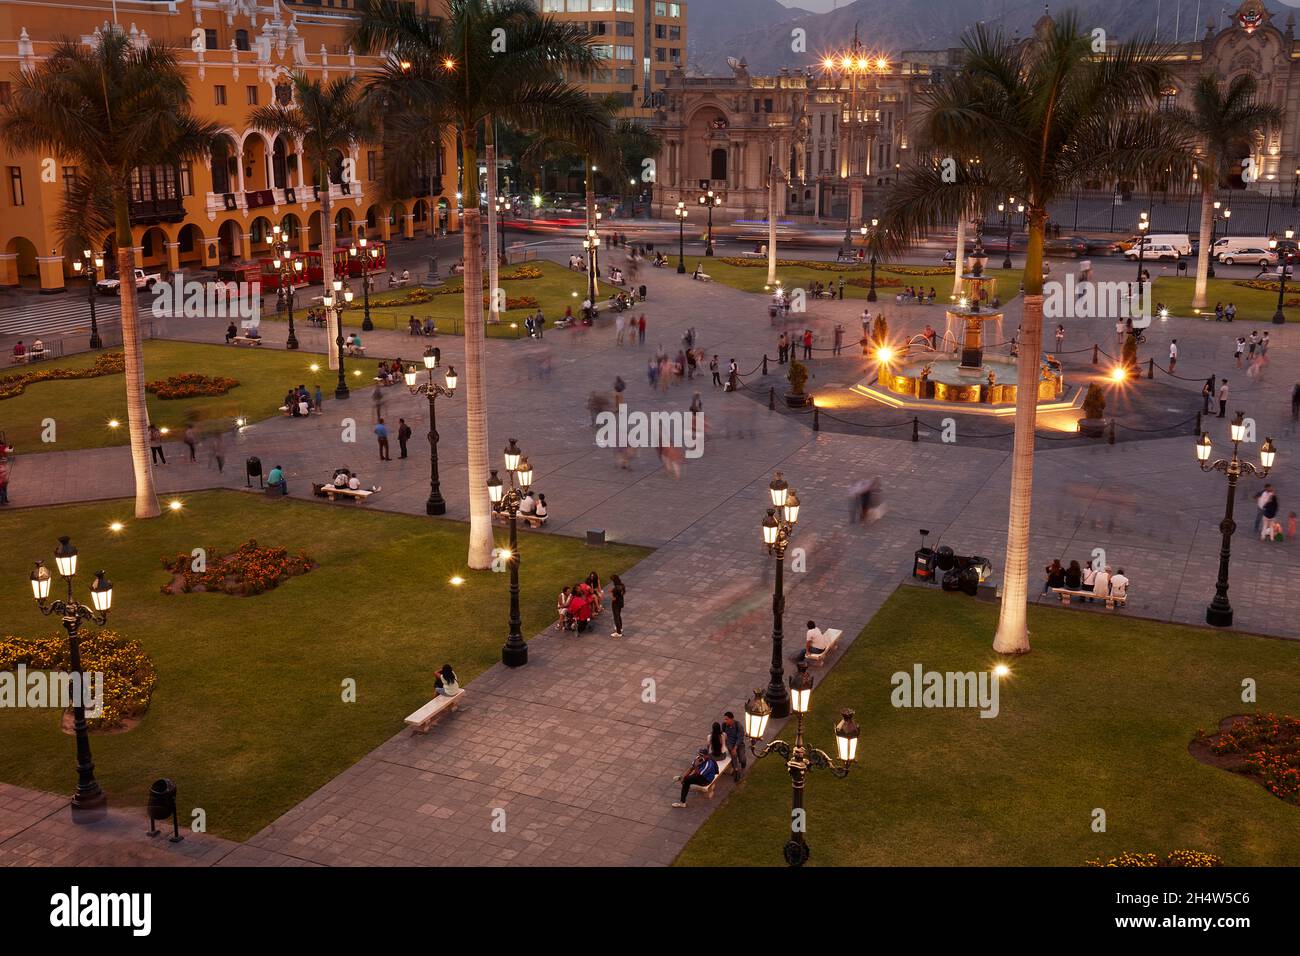 Peruvians in Plaza Mayor at dusk, Historic centre of Lima (World Heritage Site), Peru, South America Stock Photo